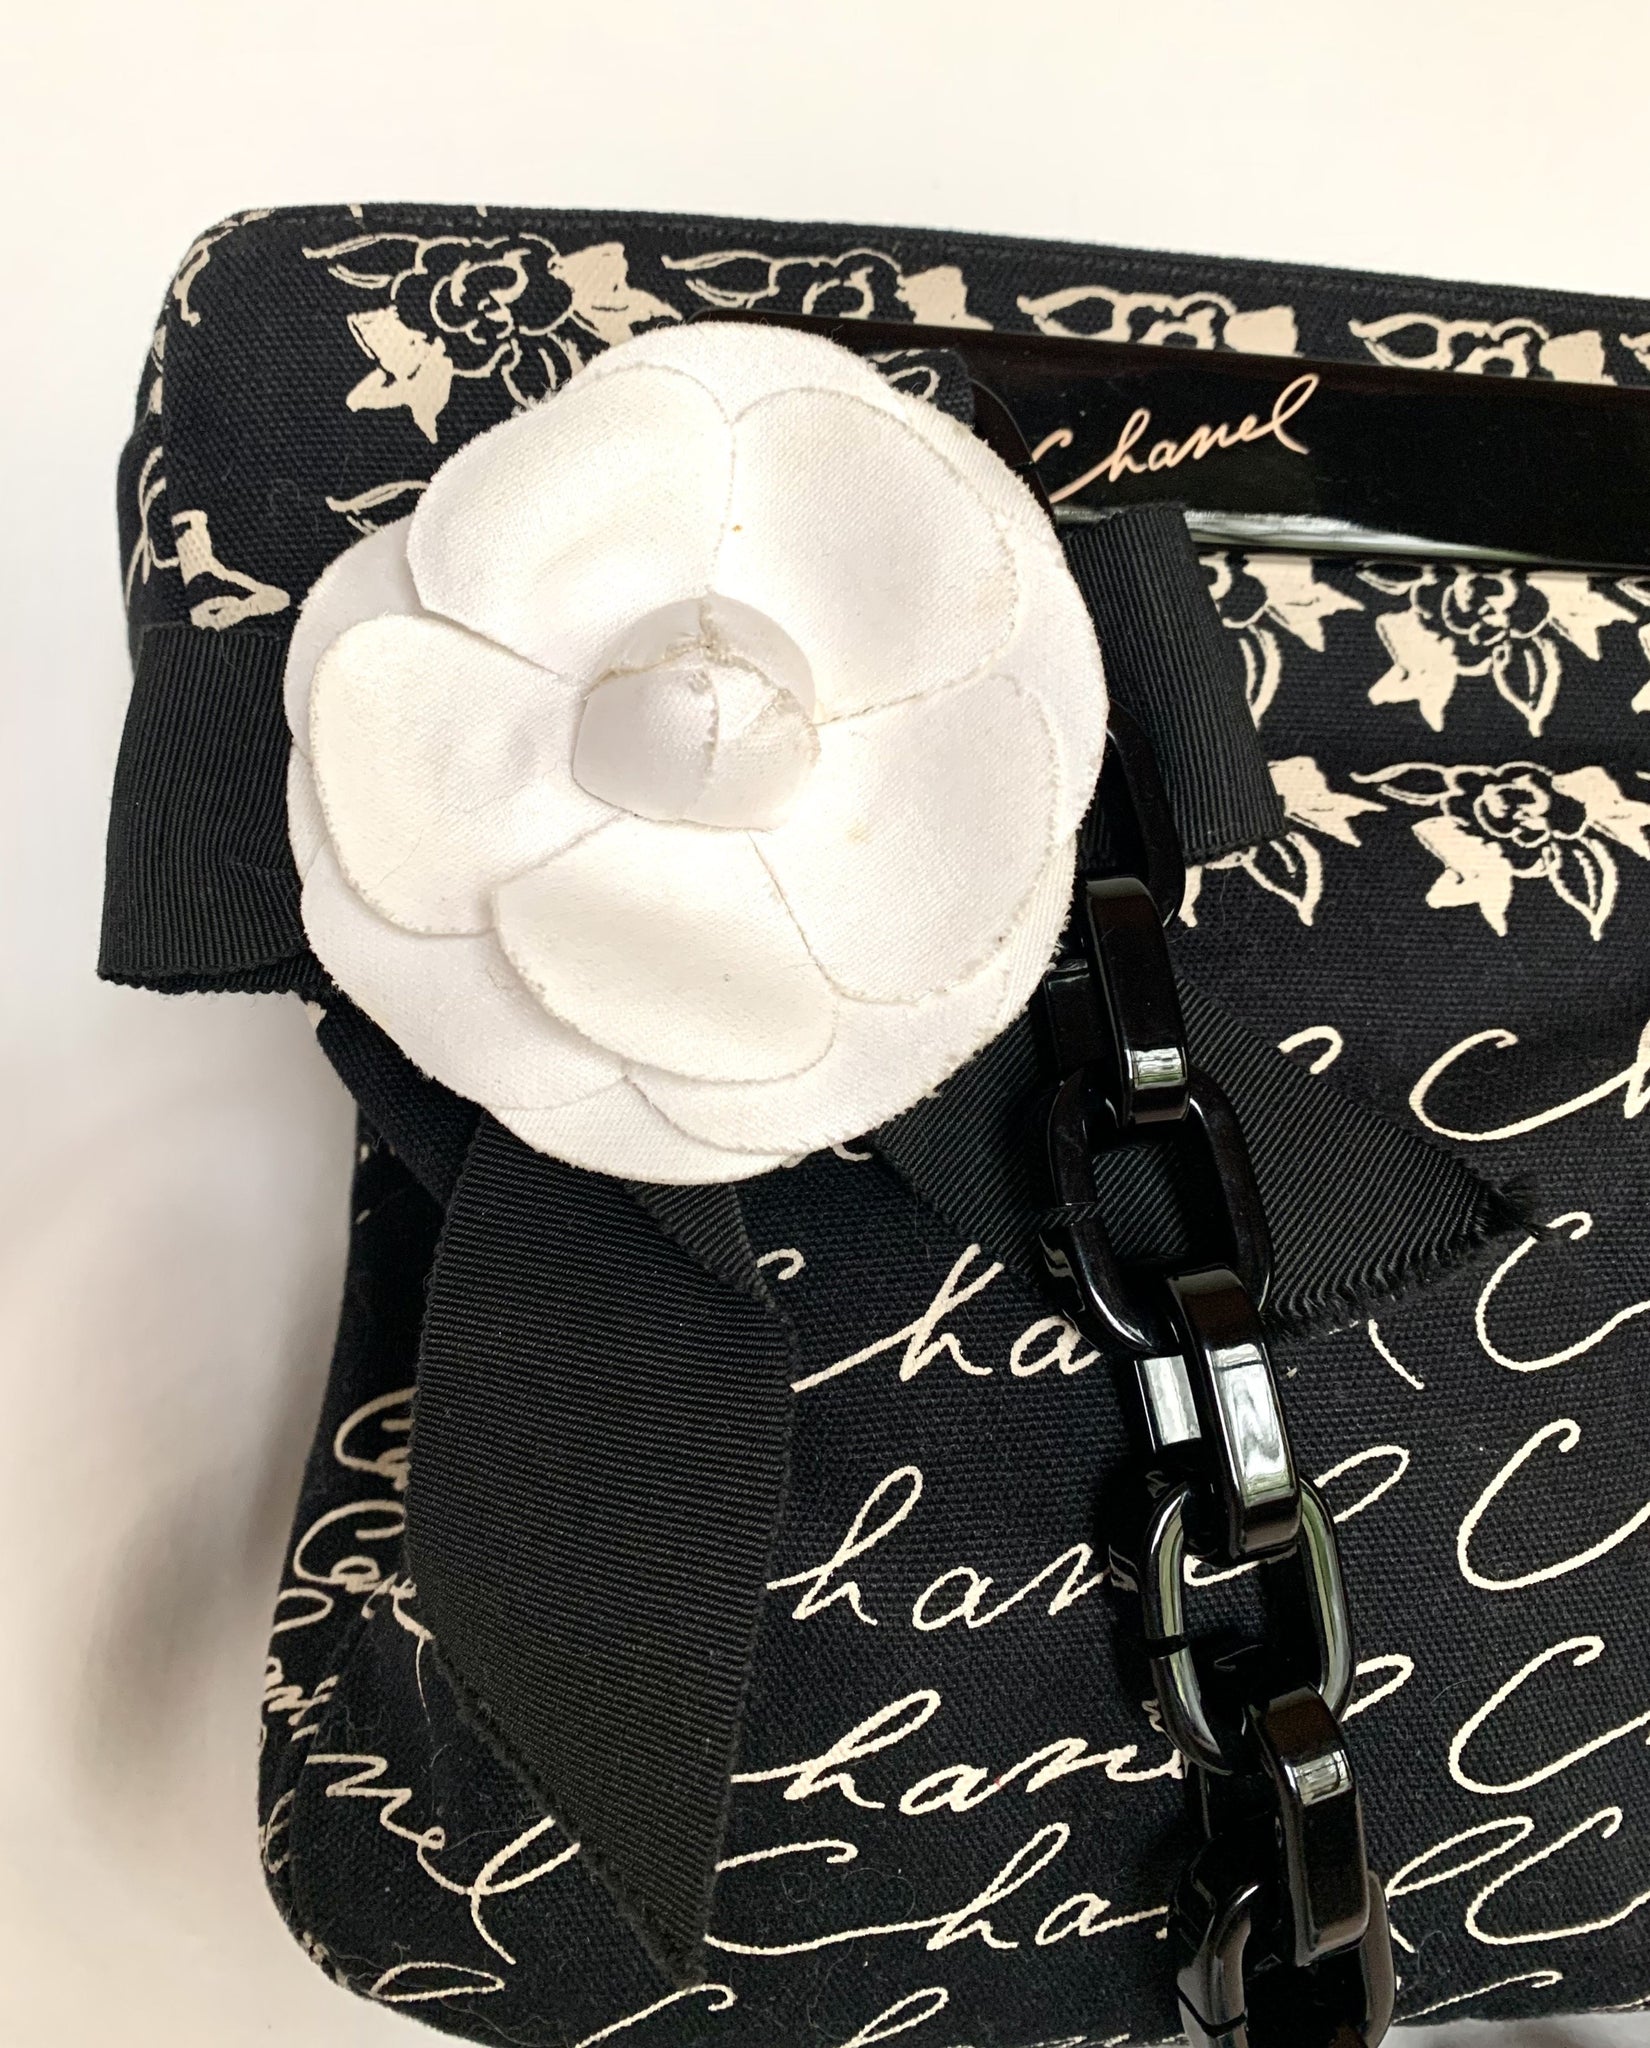 CHANEL MADEMOISELLE COCO RUE CAMBON CANVAS PRINTED HANDBAG WITH CAMELL –  The Paris Mademoiselle